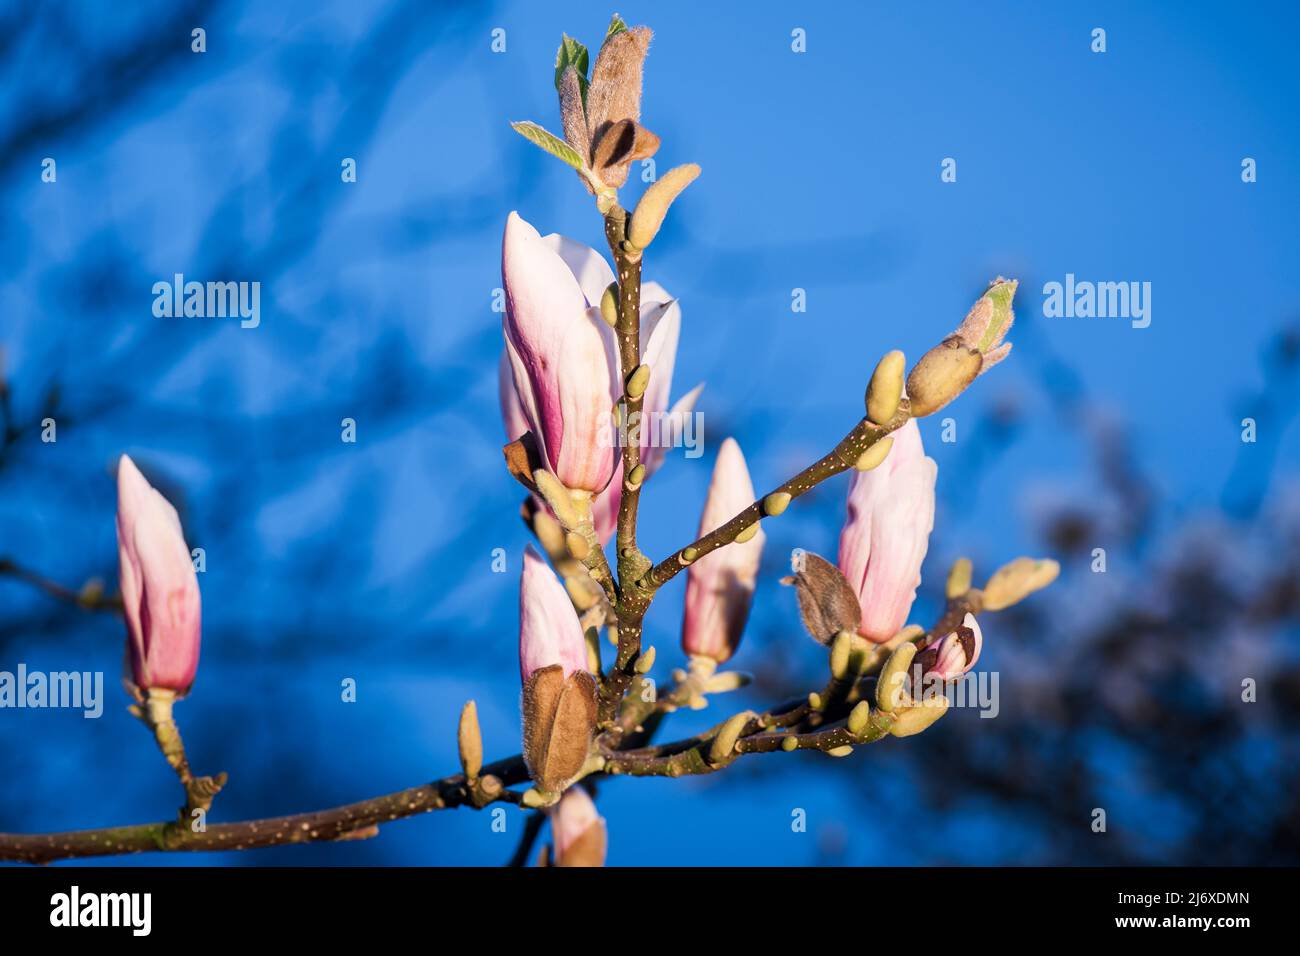 Close-up view of a branch of Star Magnolia (lat: Magnolia stellata) with several freshly blossoming flowers against a blurred natural background. Stock Photo